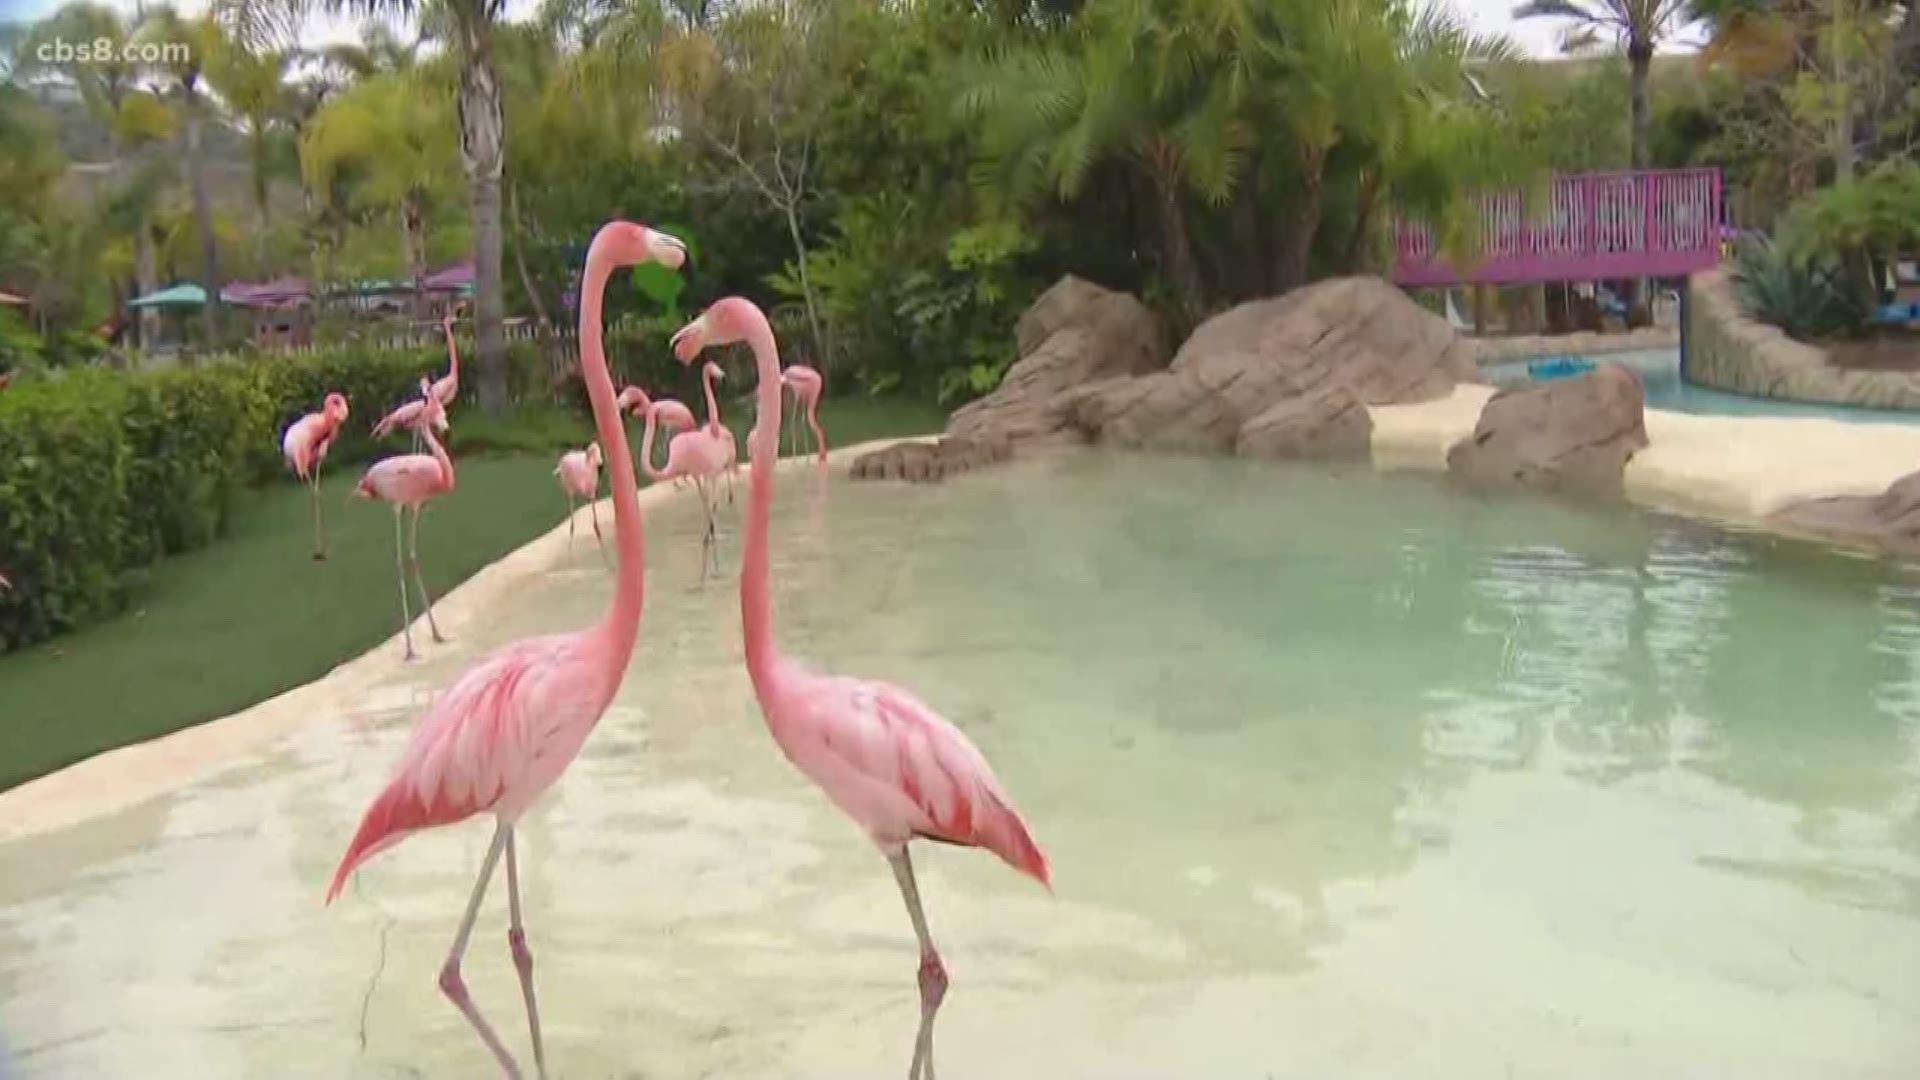 Anyone aged 6 and above are allowed to enter the Flamingo Experience.